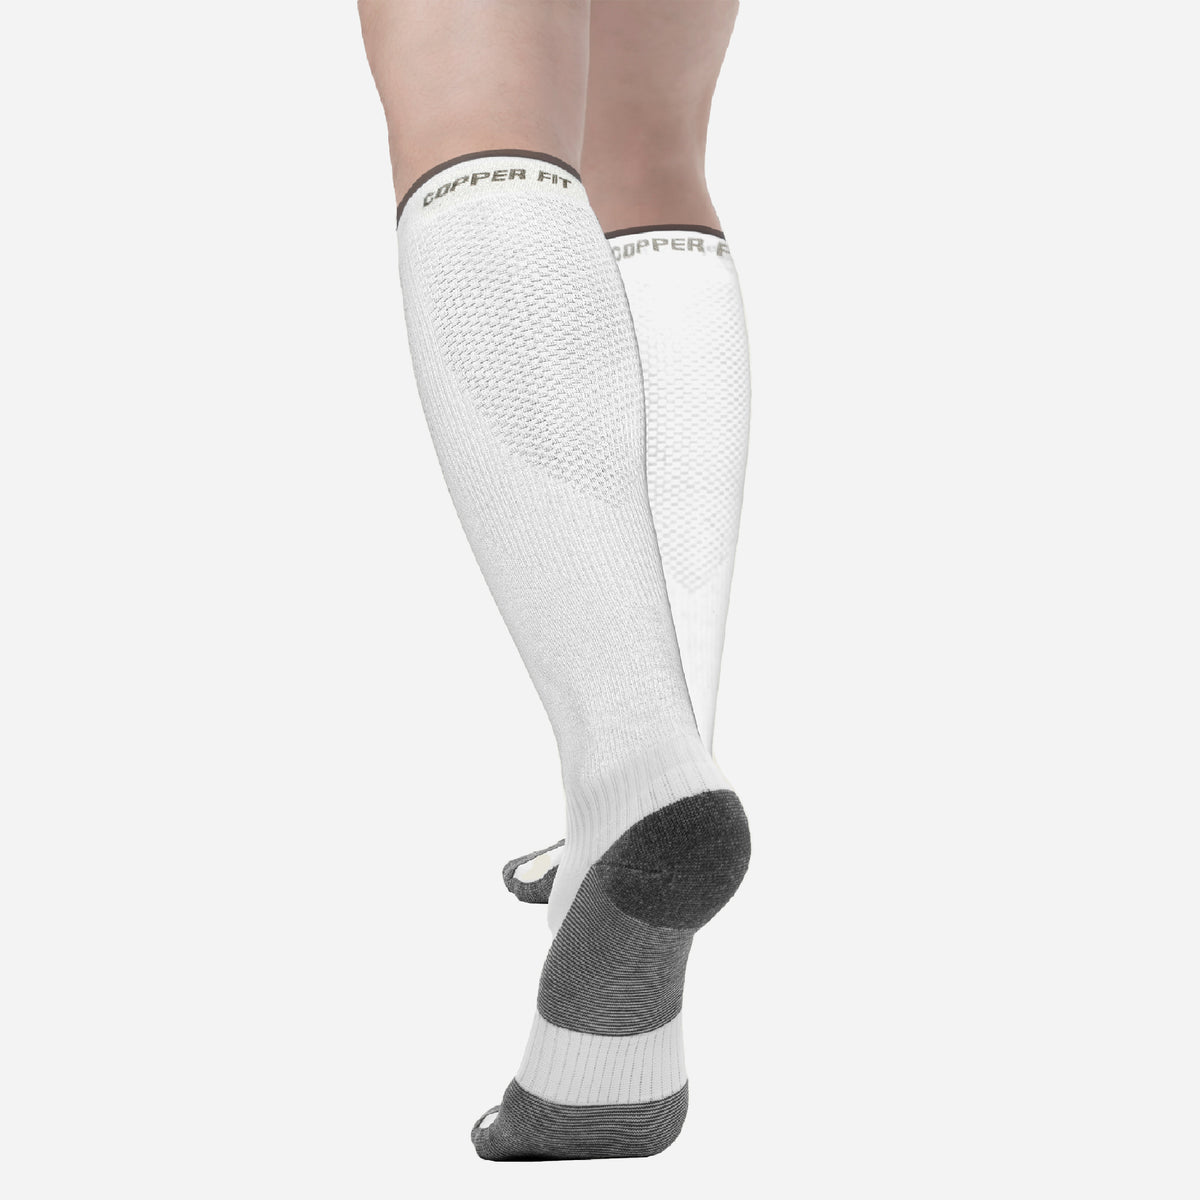 Do my compression stockings fit?